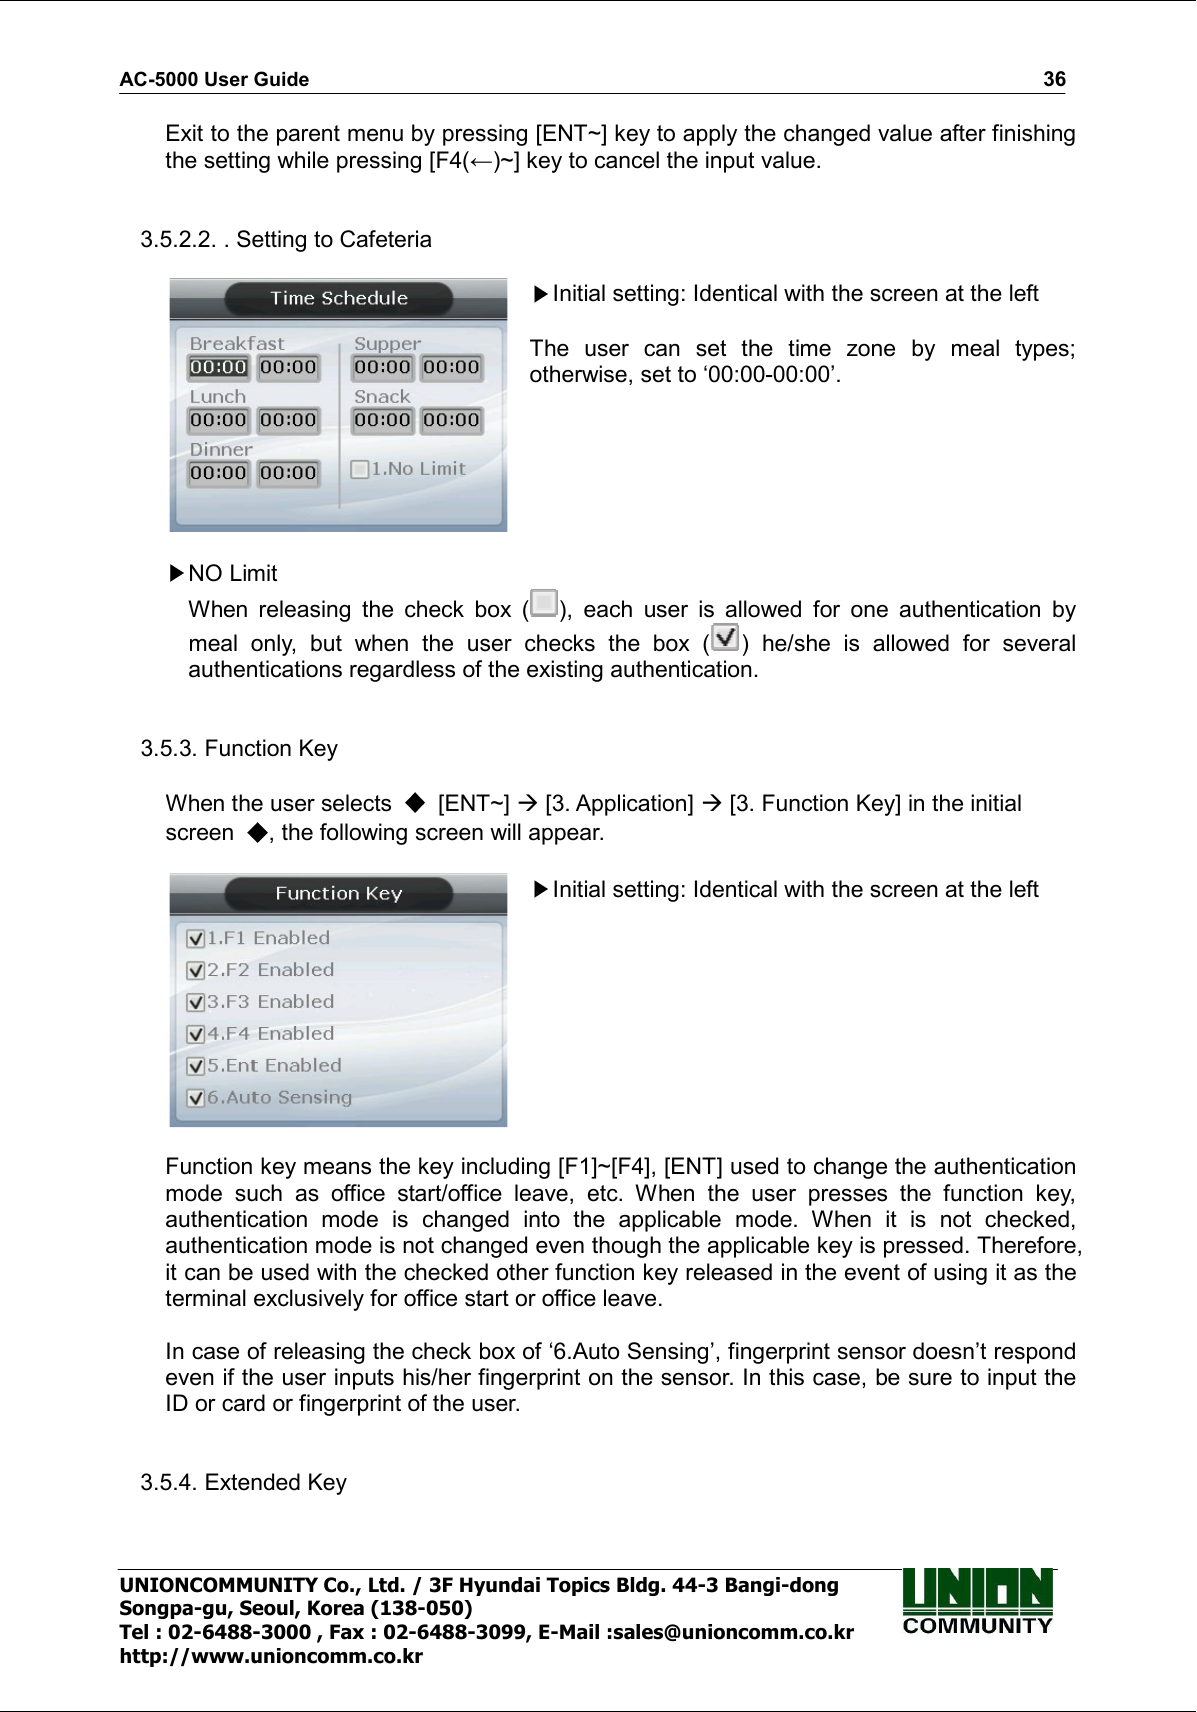 AC-5000 User Guide                                                                                                                                                   36 UNIONCOMMUNITY Co., Ltd. / 3F Hyundai Topics Bldg. 44-3 Bangi-dong Songpa-gu, Seoul, Korea (138-050) Tel : 02-6488-3000 , Fax : 02-6488-3099, E-Mail :sales@unioncomm.co.kr http://www.unioncomm.co.kr Exit to the parent menu by pressing [ENT~] key to apply the changed value after finishing the setting while pressing [F4(←)~] key to cancel the input value.   3.5.2.2. . Setting to Cafeteria   Initial setting: Identical with the screen at the left  The  user  can  set  the  time  zone  by  meal  types; otherwise, set to ‘00:00-00:00’.   NO Limit When  releasing  the  check  box  ( ),  each  user  is  allowed  for  one  authentication  by meal  only,  but  when  the  user  checks  the  box  ( )  he/she  is  allowed  for  several authentications regardless of the existing authentication.     3.5.3. Function Key      When the user selects    [ENT~]  [3. Application]  [3. Function Key] in the initial screen  , the following screen will appear.   Initial setting: Identical with the screen at the left   Function key means the key including [F1]~[F4], [ENT] used to change the authentication mode  such  as  office  start/office  leave,  etc.  When  the  user  presses  the  function  key, authentication  mode  is  changed  into  the  applicable  mode.  When  it  is  not  checked, authentication mode is not changed even though the applicable key is pressed. Therefore, it can be used with the checked other function key released in the event of using it as the terminal exclusively for office start or office leave.  In case of releasing the check box of ‘6.Auto Sensing’, fingerprint sensor doesn’t respond even if the user inputs his/her fingerprint on the sensor. In this case, be sure to input the ID or card or fingerprint of the user.   3.5.4. Extended Key      